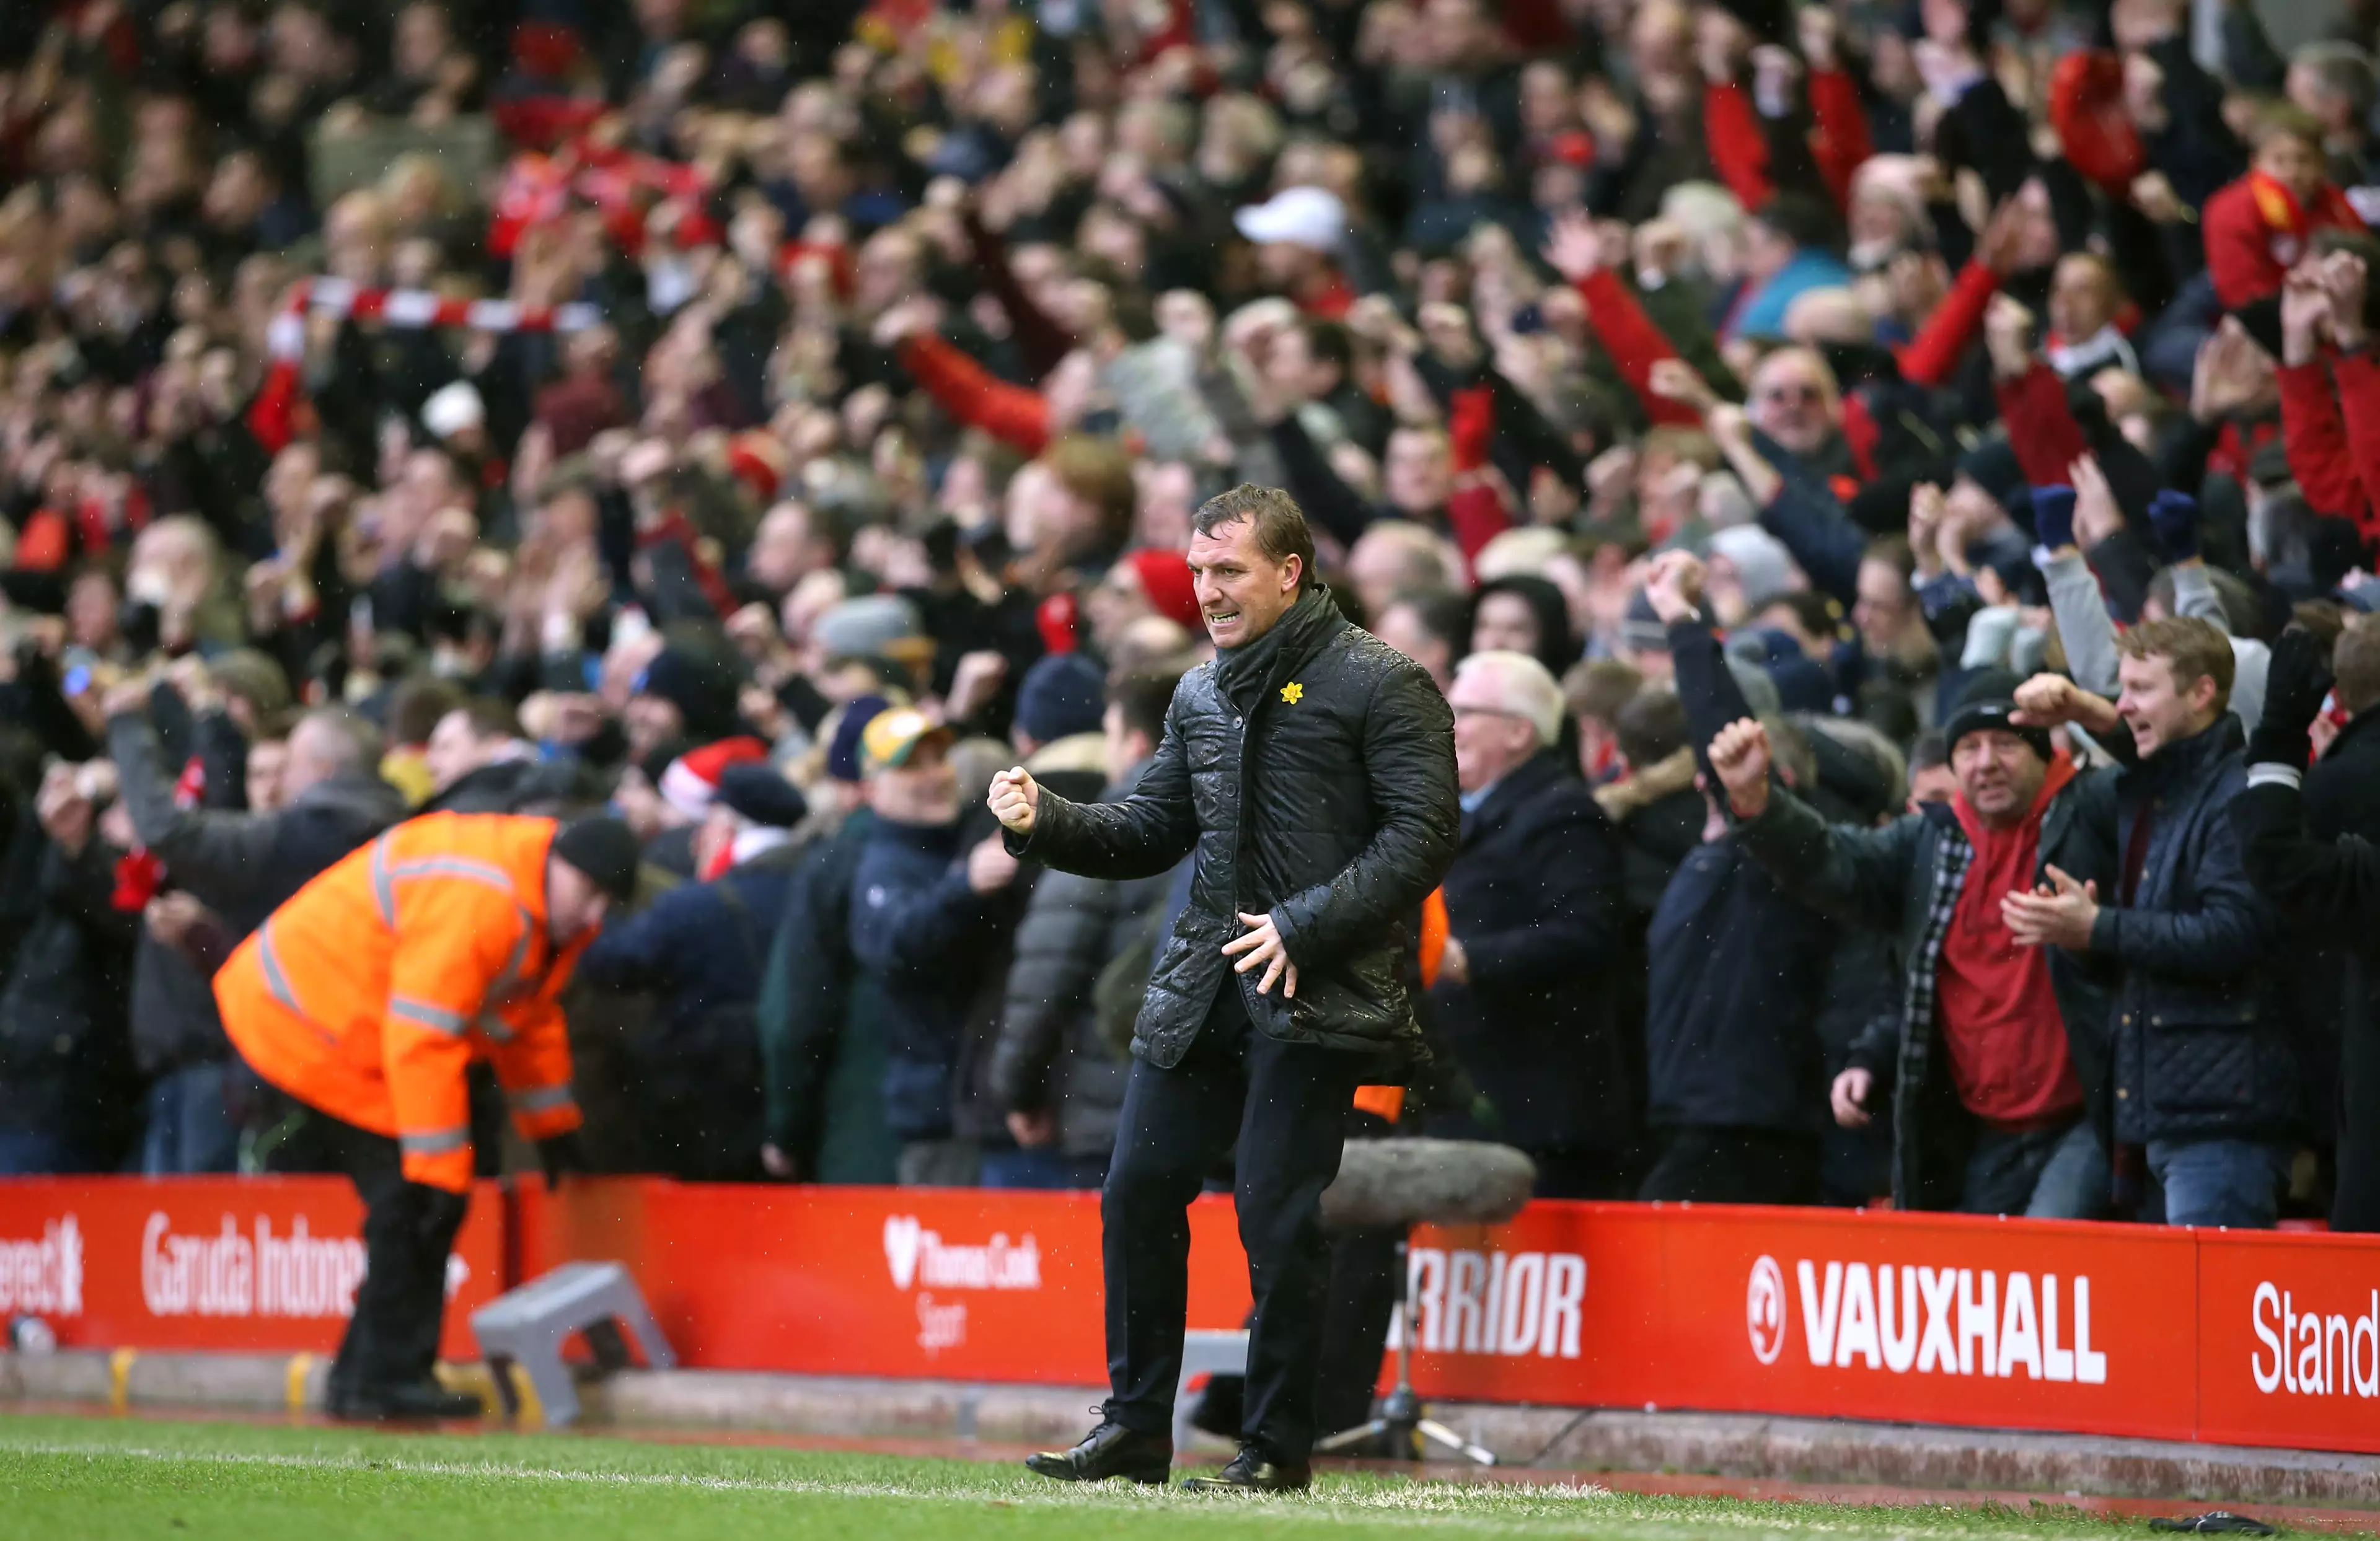 Rodgers had a good time at Anfield. Image: PA Images